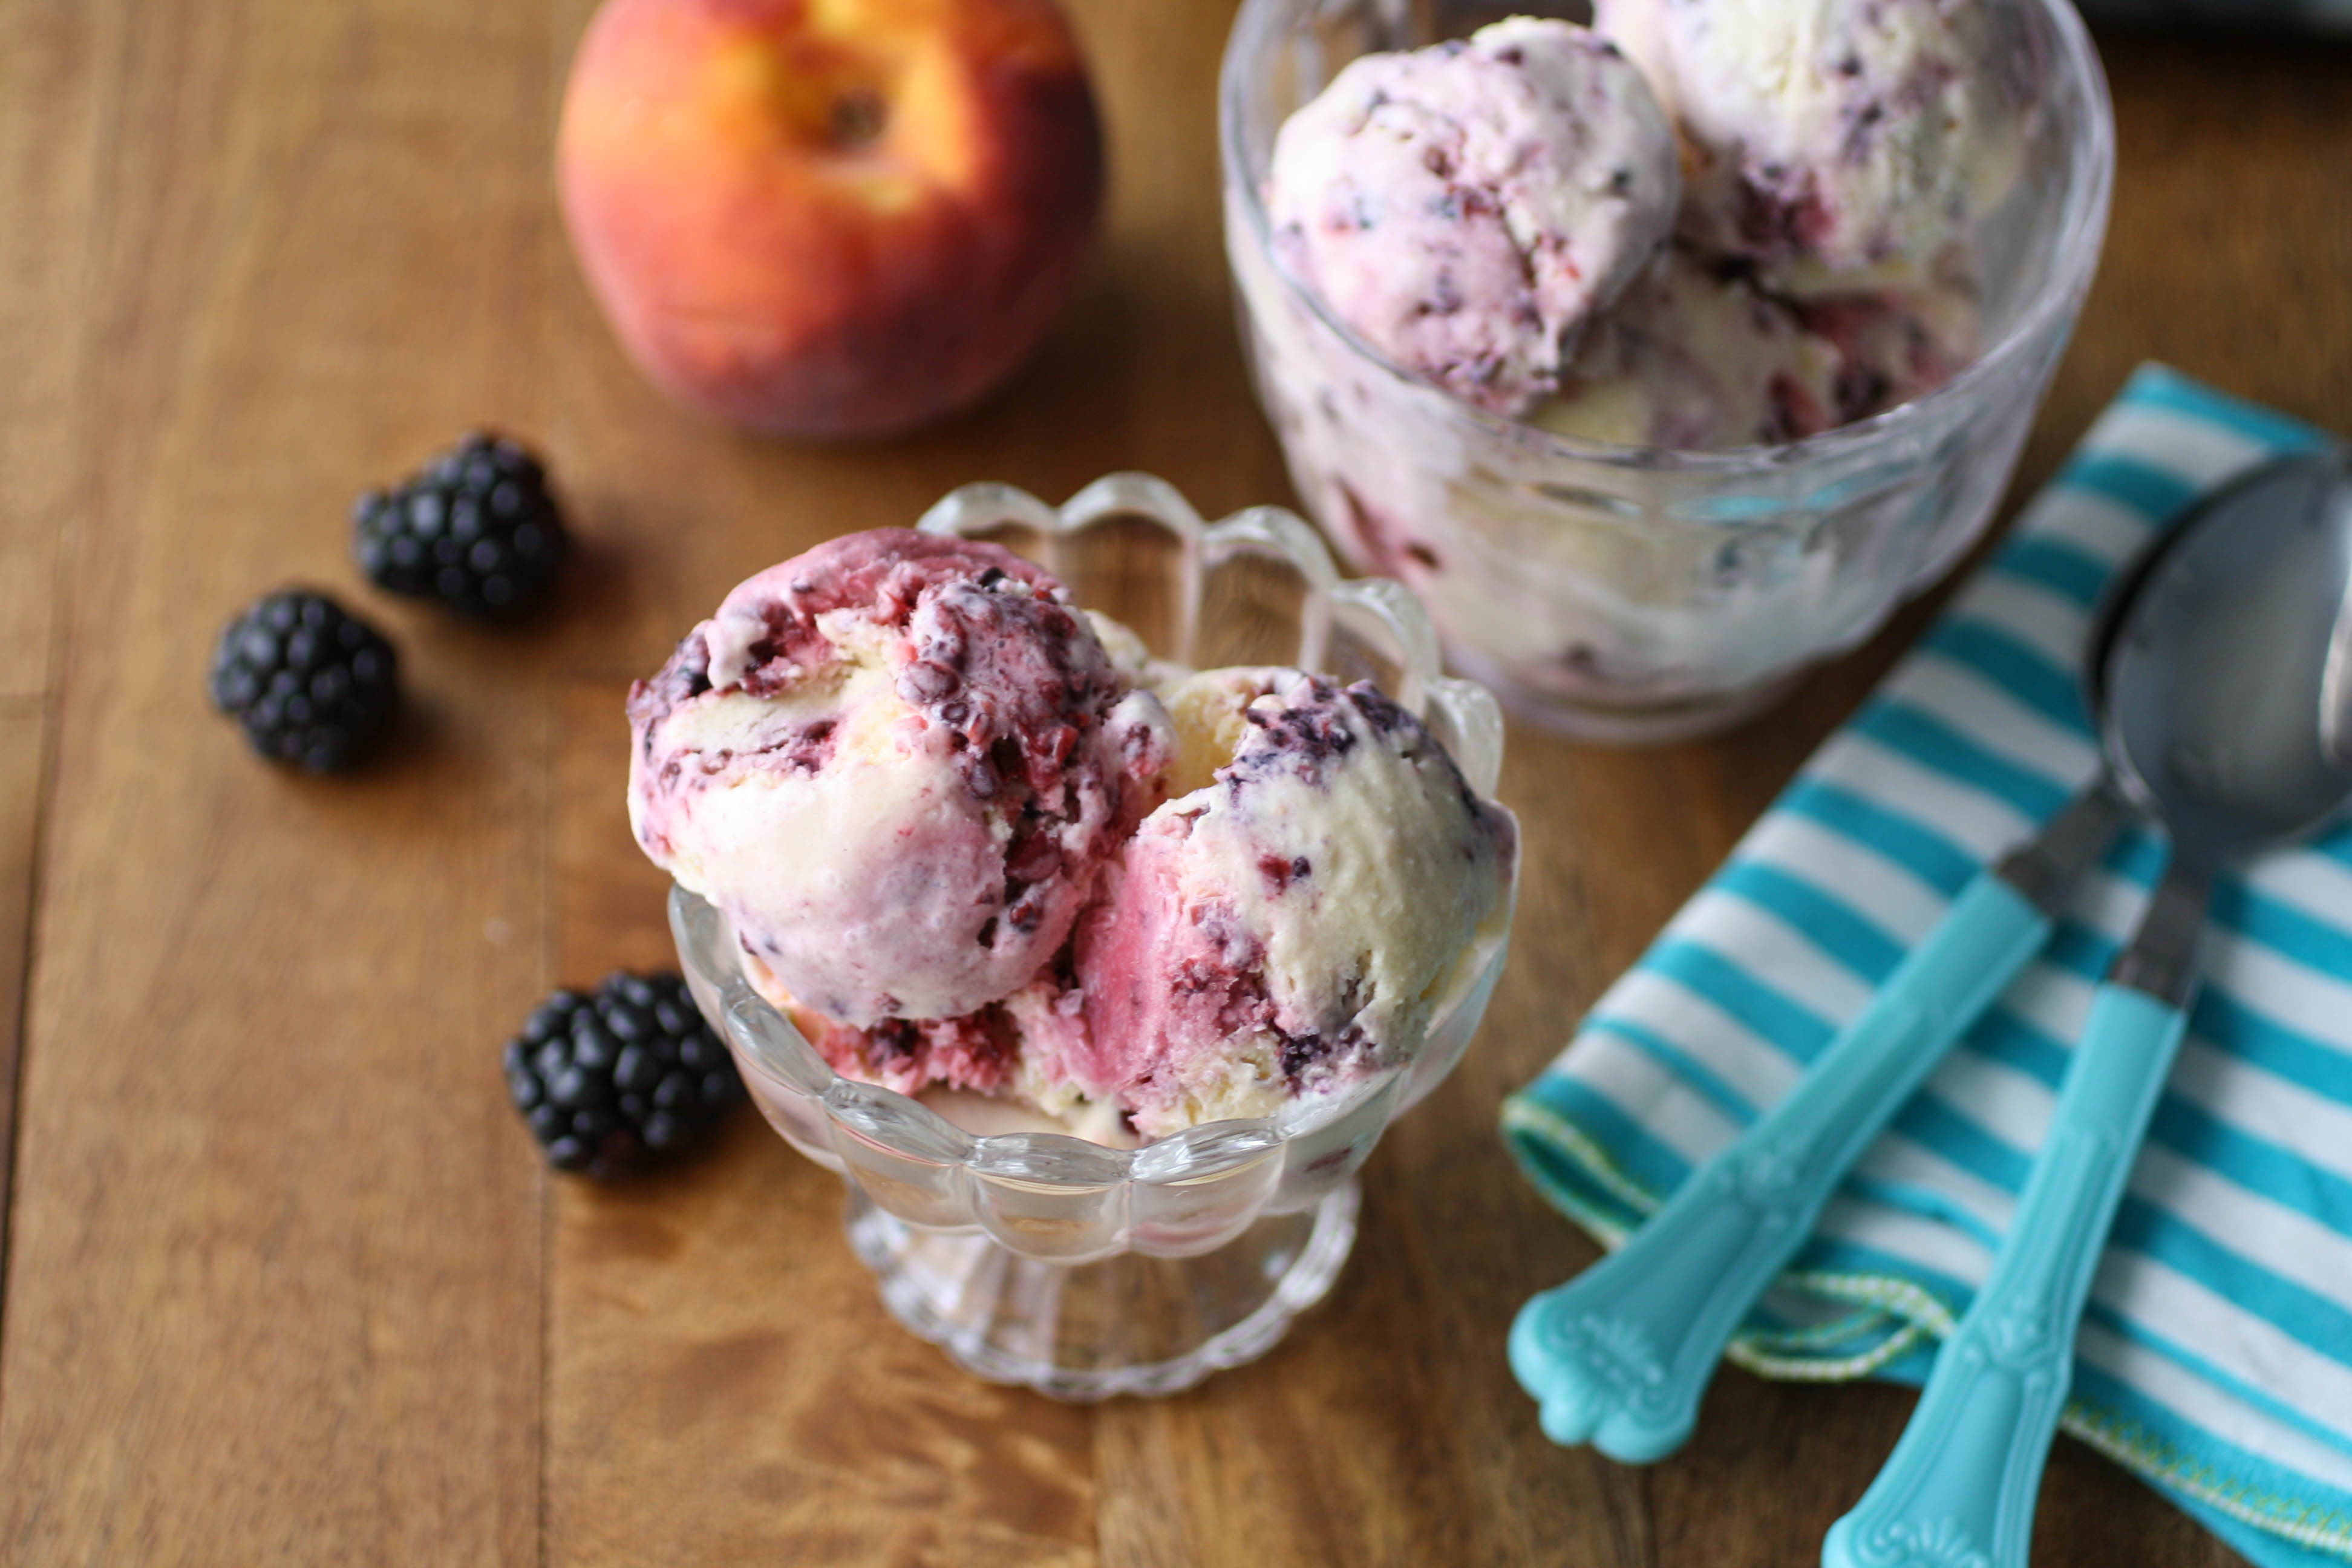 Peach, Lavender, and Blackberry Ice Cream is a flavor you'll want to dig into when dessert time rolls around! Peach, Lavender, and Blackberry Ice Cream is a tasty dessert you'll love.